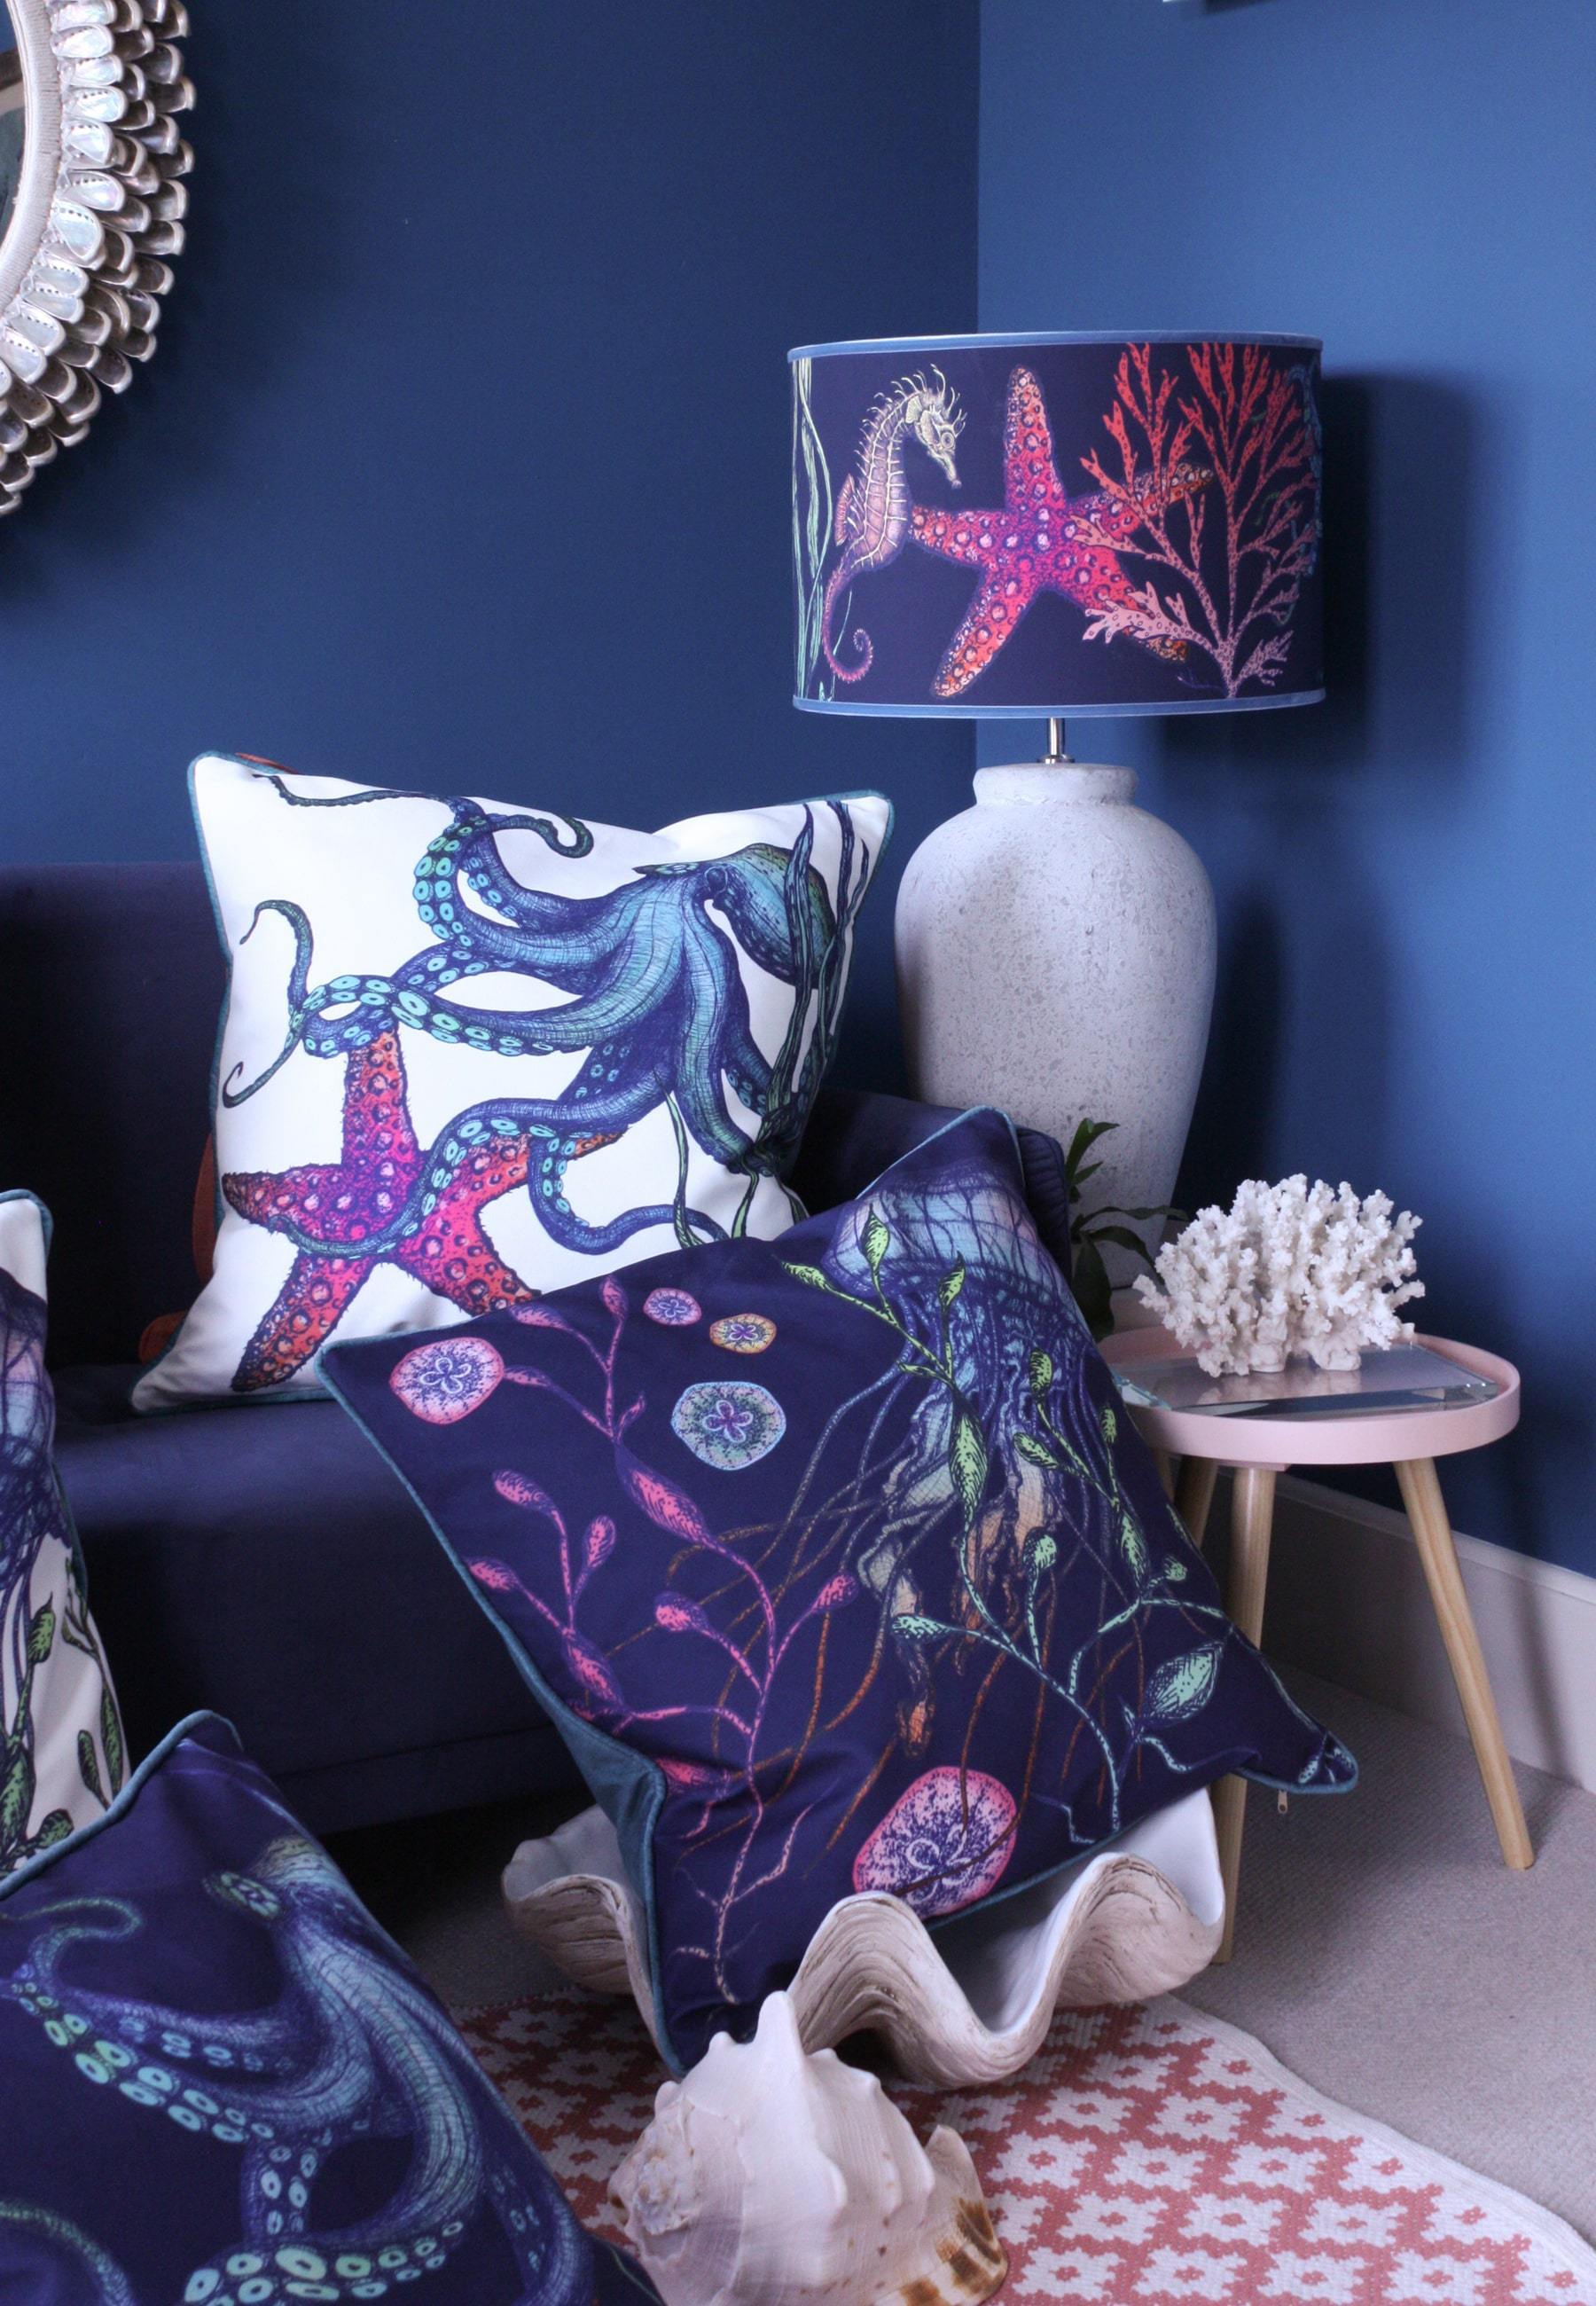 Rainbow Reef Navy Shade With Octopus,Seahorse,Starfish and Seaweed Design in bright colours on a white lampbase next to a navy sofa covered in our Reef cushions.